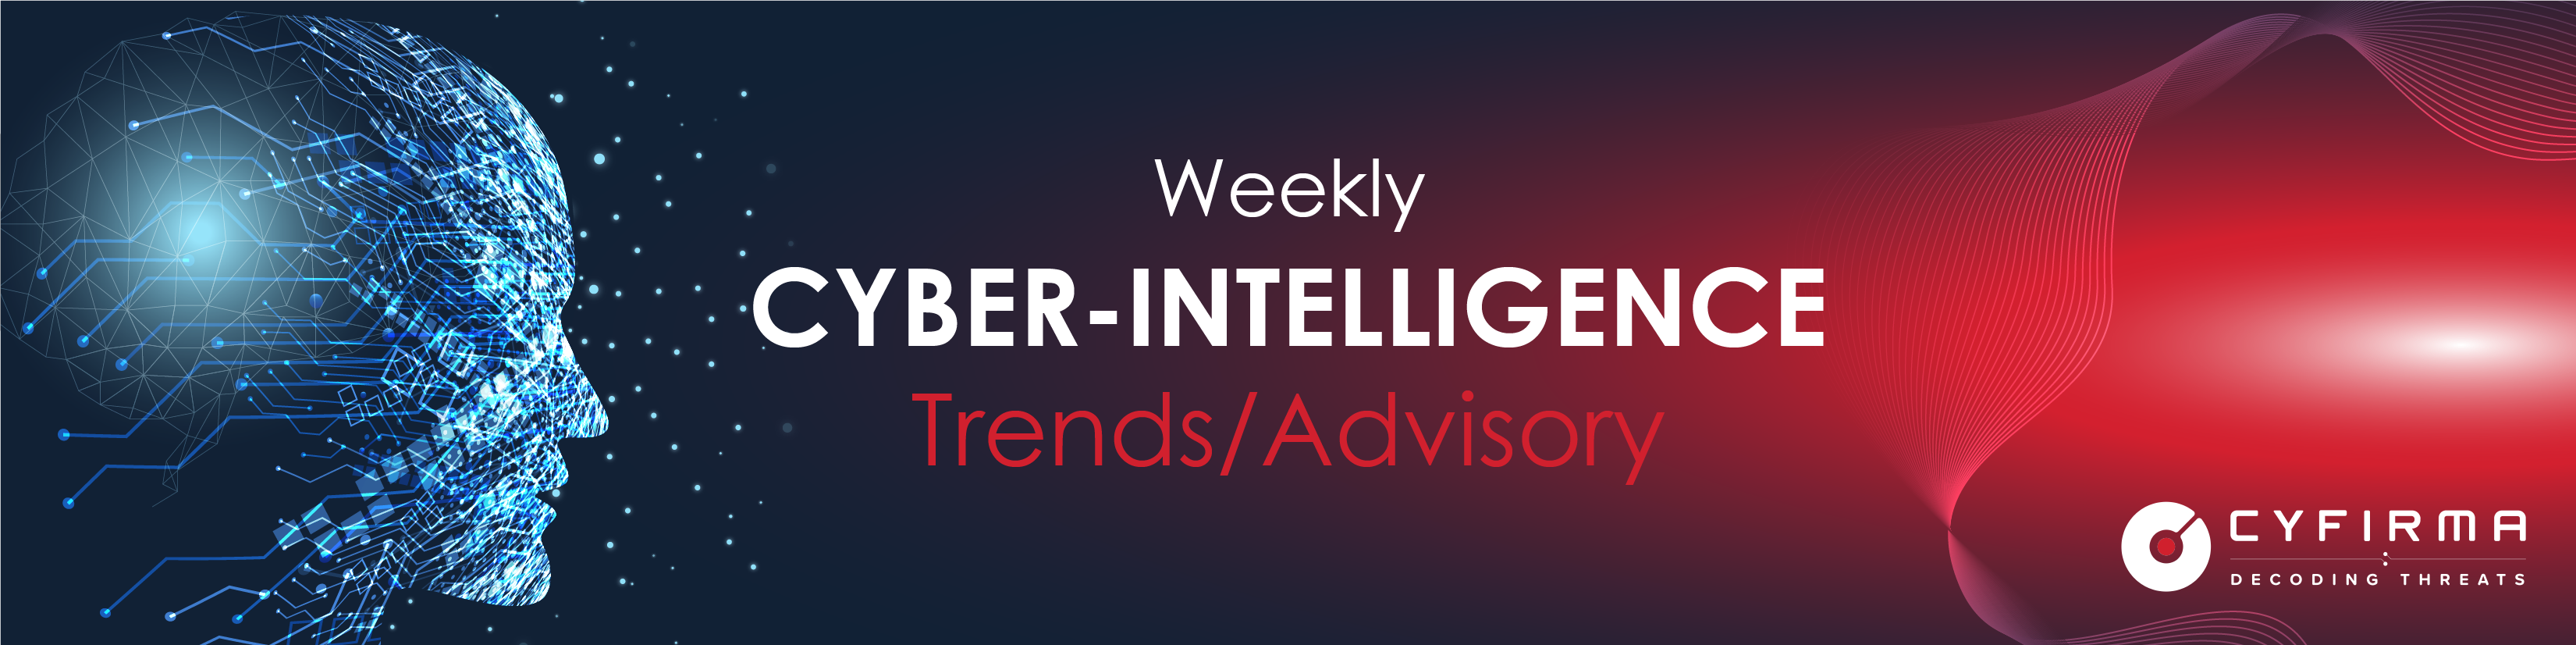 Weekly Intelligence Trends and Advisory | Threat Actor in Focus | Rise in Malware, Ransomware, Phishing | Vulnerability and Exploits – 9 Jan 2022